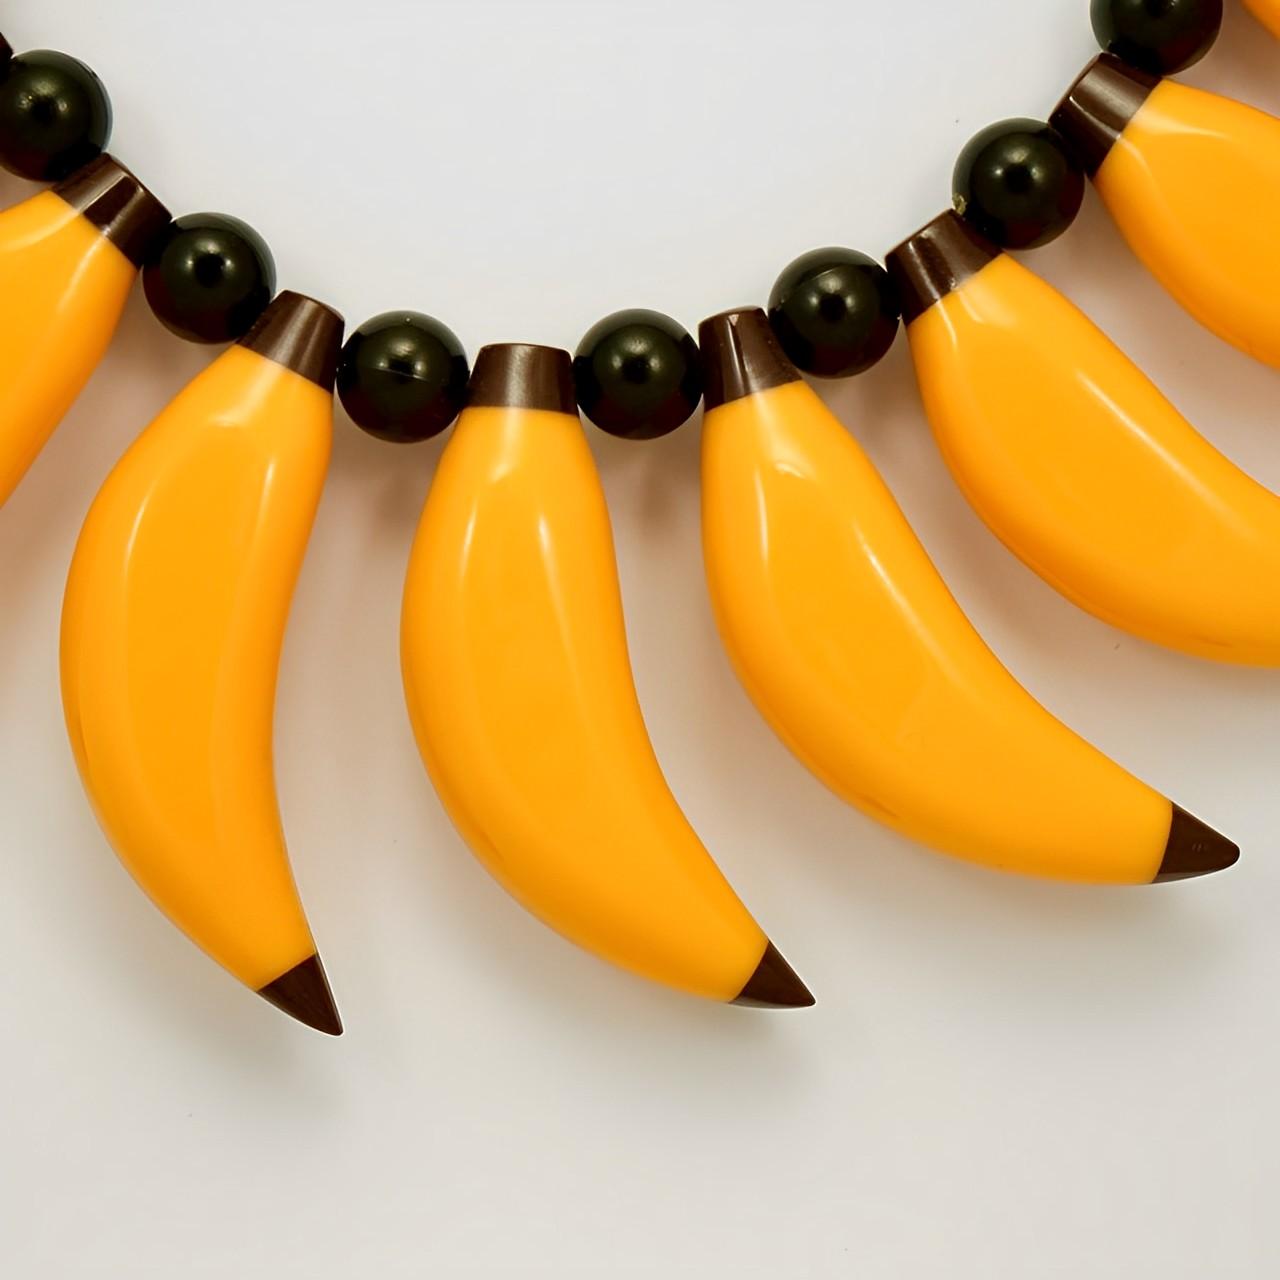 Marion Godart fantastic yellow and black shiny plastic bananas, with round black plastic beads, and a hook clasp. The necklace is length 48.3 cm / 19 inches. The largest banana is length 5.6 cm / 2.2 inches. It is in very good condition, as